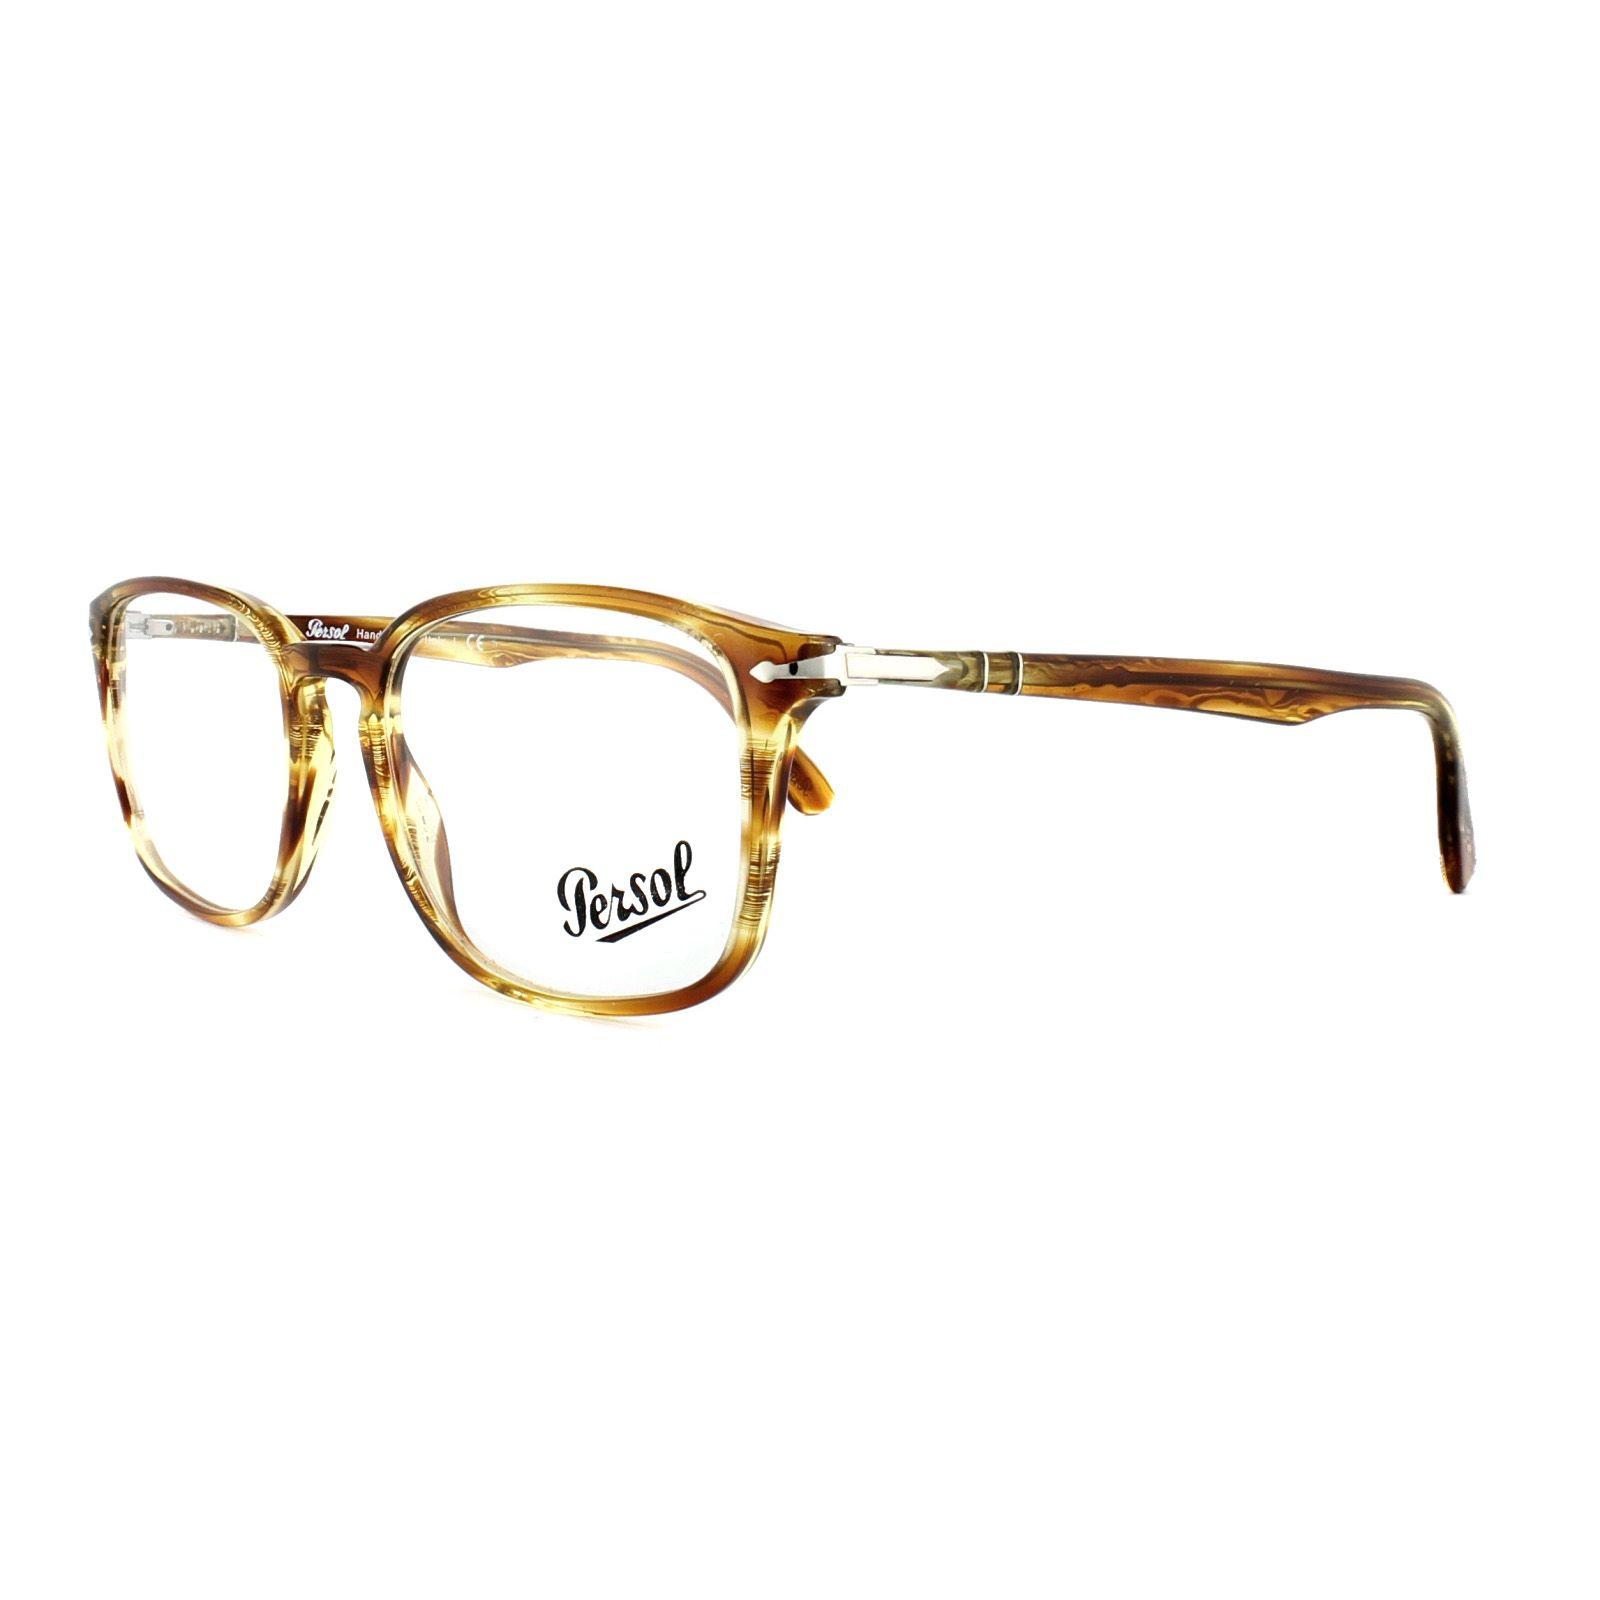 Striped Brown and Yellow Logo - Persol Glasses Frames PO3161V 1050 Striped Brown Yellow 52mm Mens ...